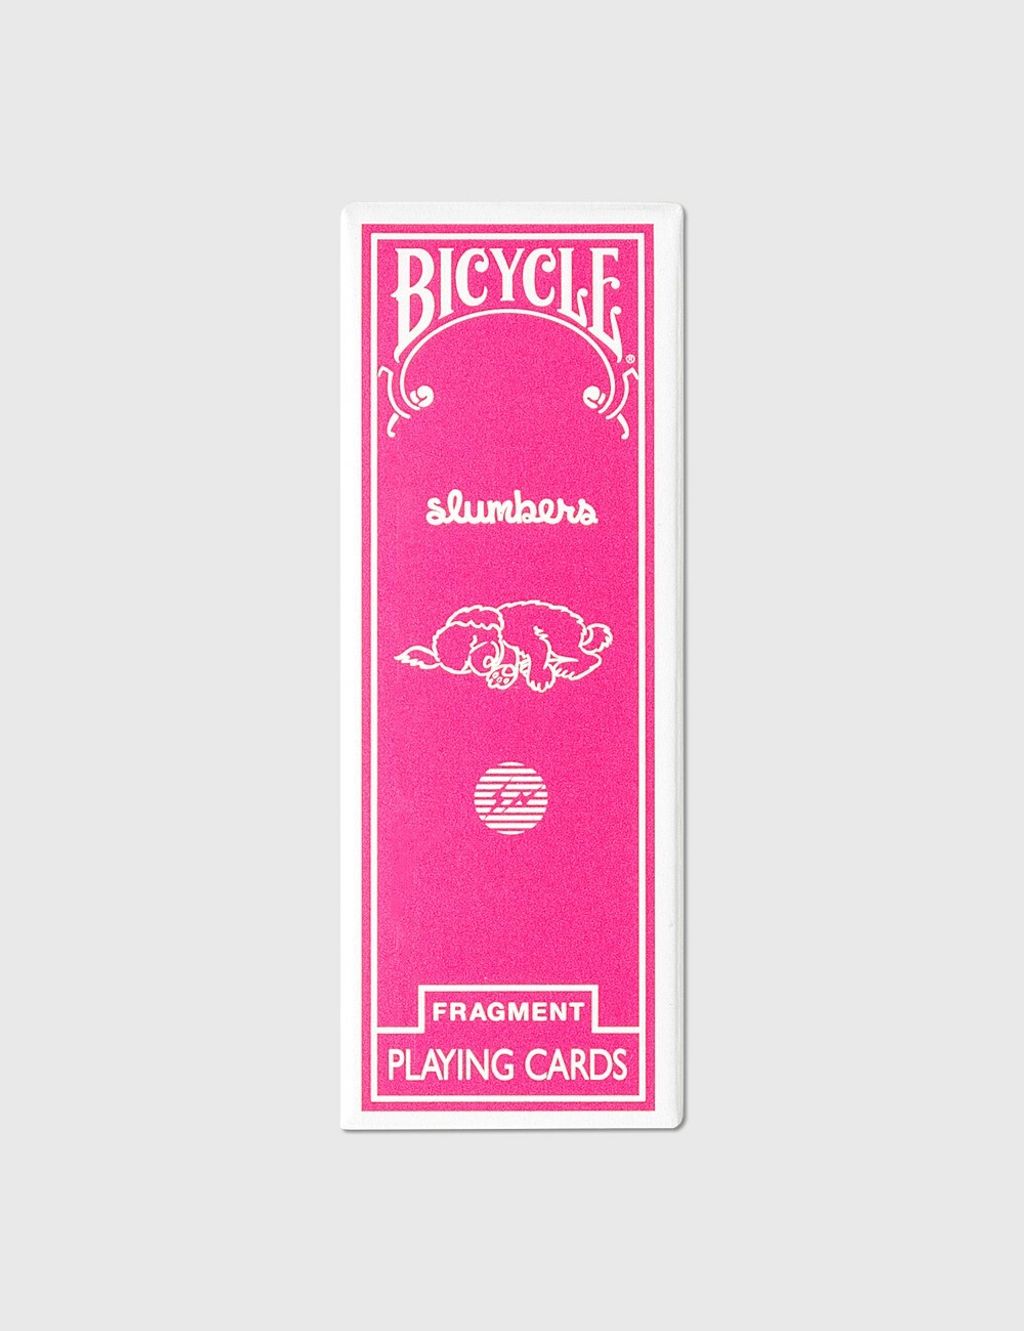 http___s3.store.hypebeast.com_media_image_2f_29_freshthings-pink-fragment-x-bicycle-playing-cards-thin-4-unisex-Card_7_1-c83c75e4b4eec6ca45cd3153eff0.jpg